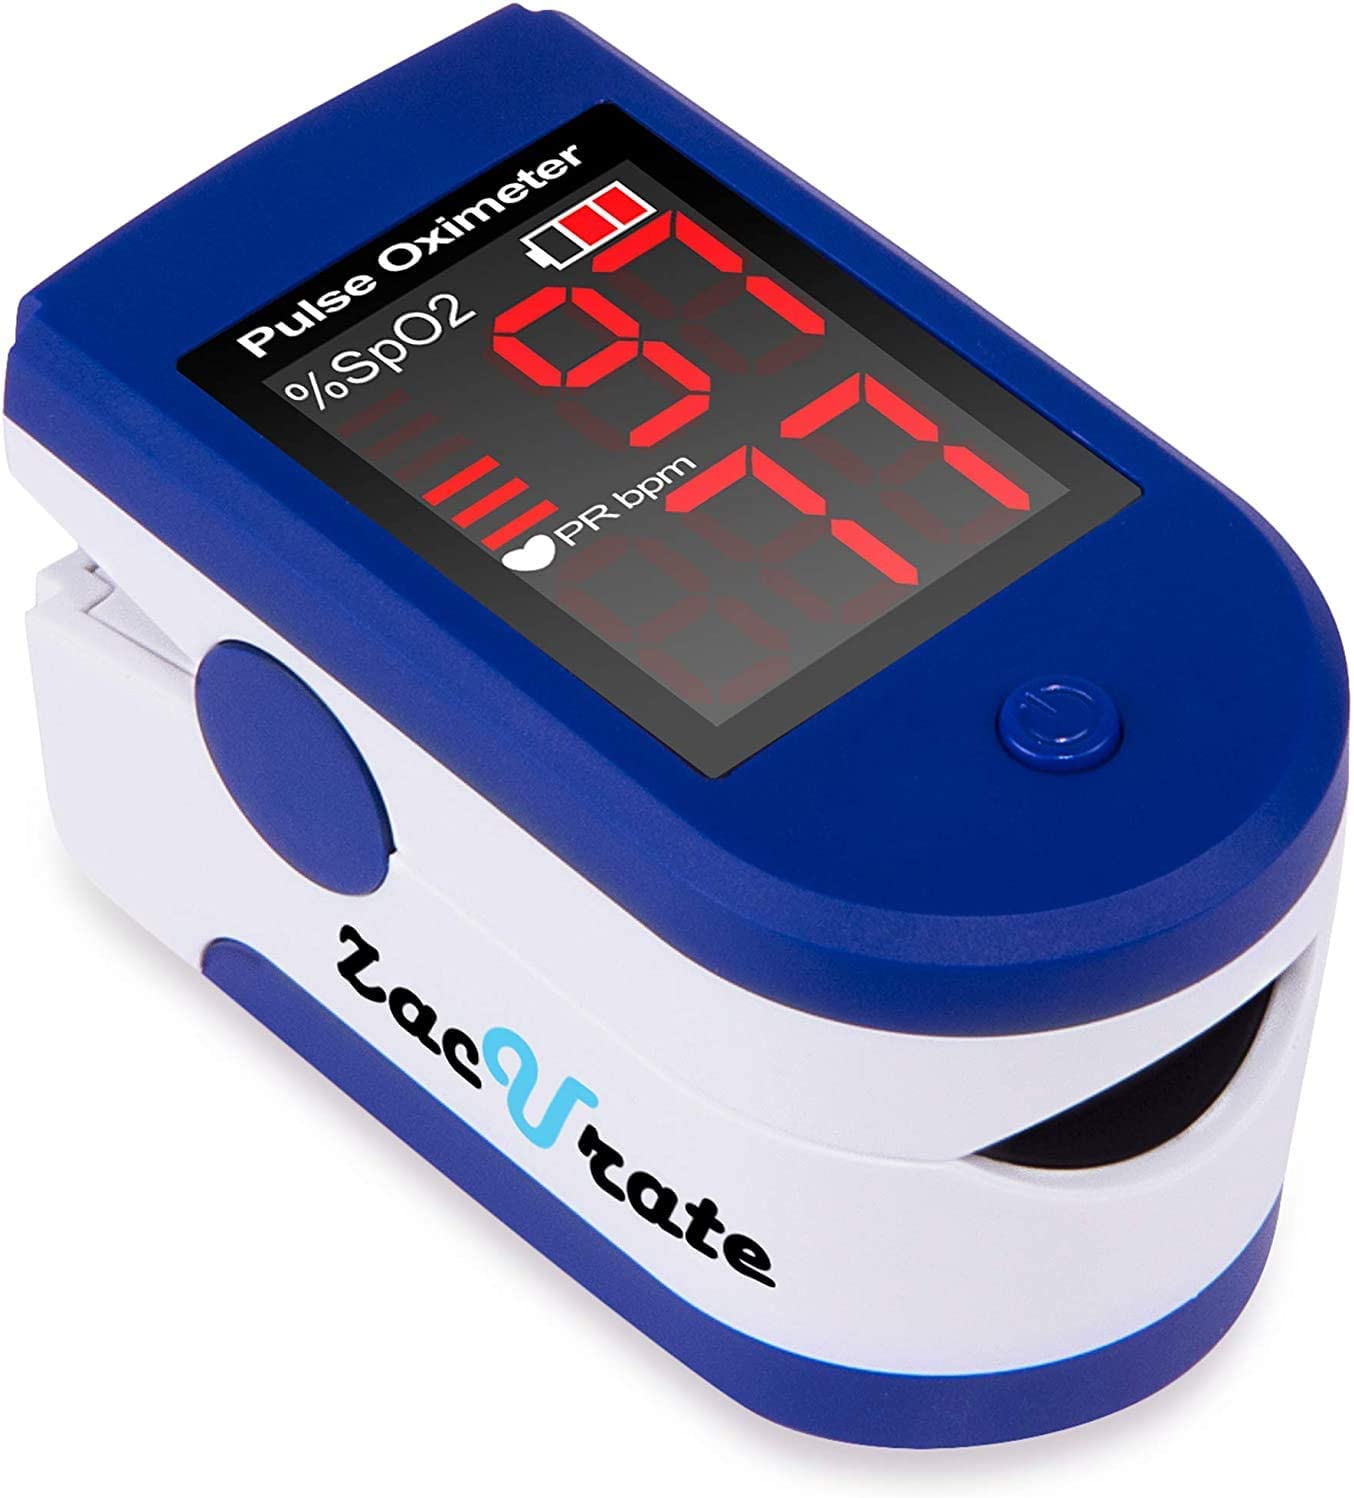 Review of Zacurate Pro Series 500DL Sporting/Aviation Fingertip Pulse Oximeter Blood Oxygen Saturation Monitor with silicon cover, batteries and lanyard (Mystic Purple)